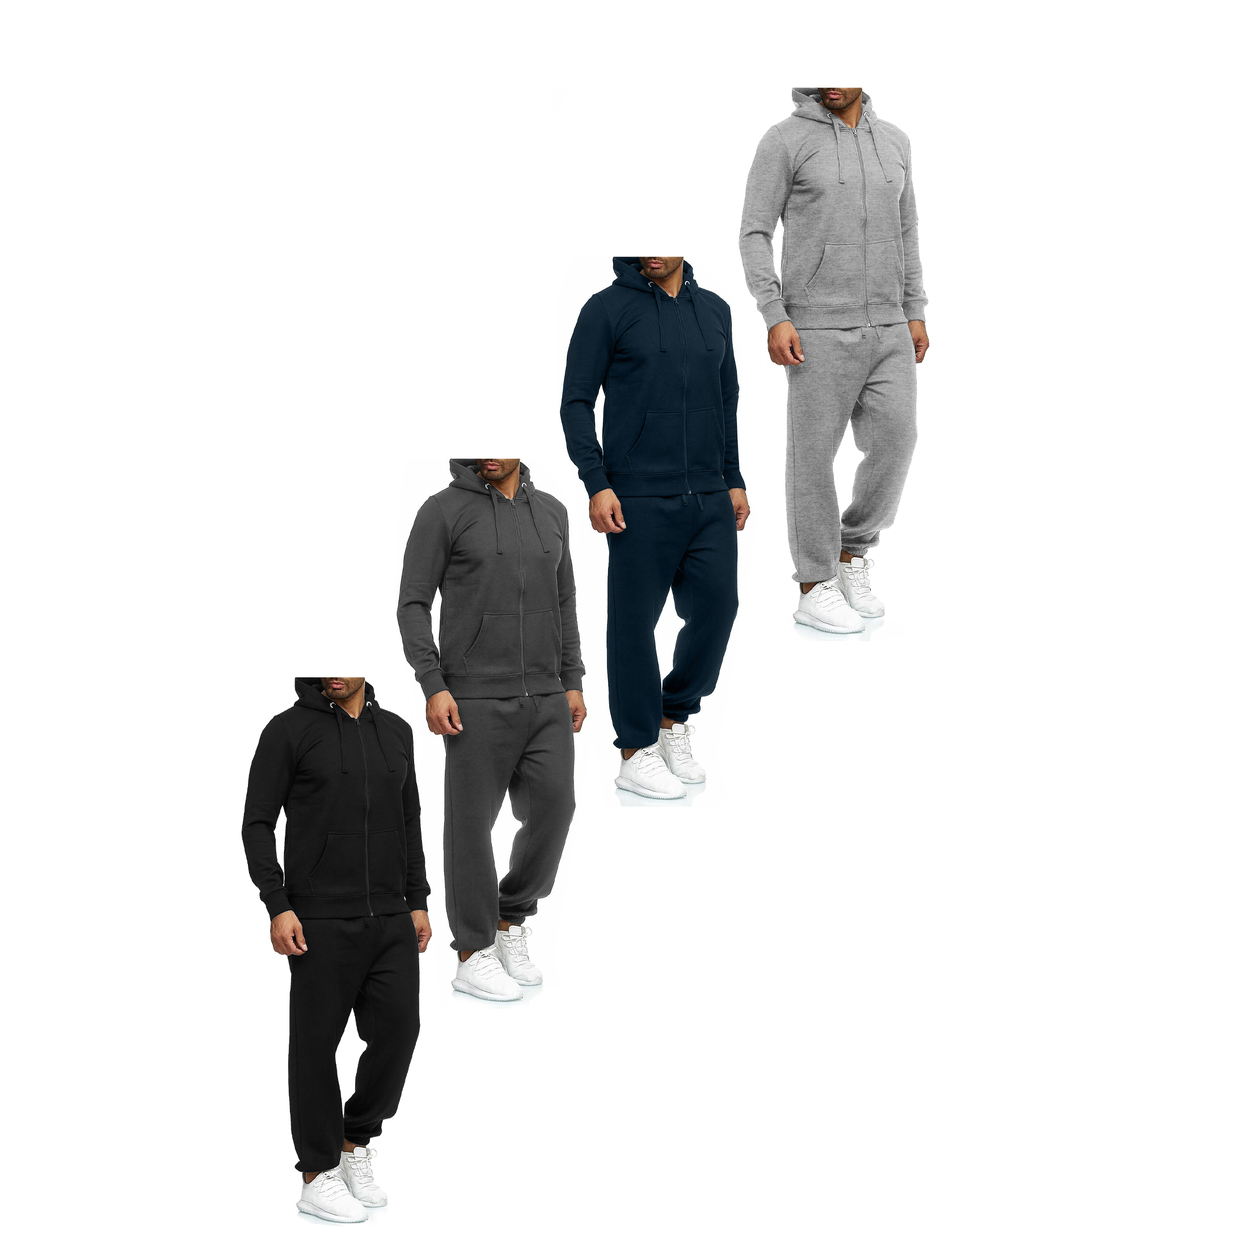 Multi-Pack: Men's Casual Big & Tall Athletic Active Winter Warm Fleece Lined Full Zip Tracksuit Jogger Set - Grey, 1-pack, X-large